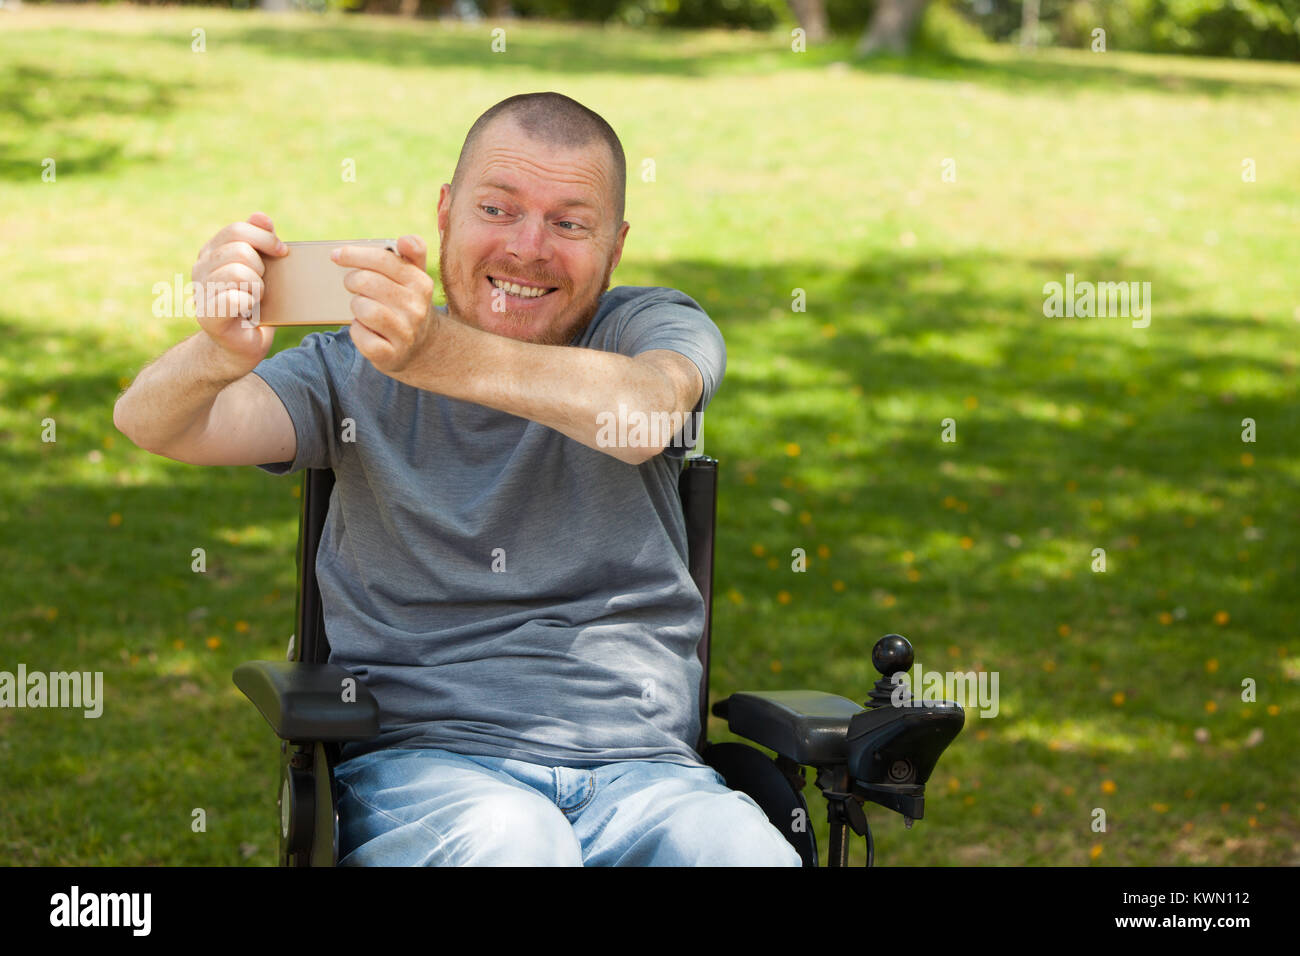 Disabled man in wheelchair doing selfie Stock Photo